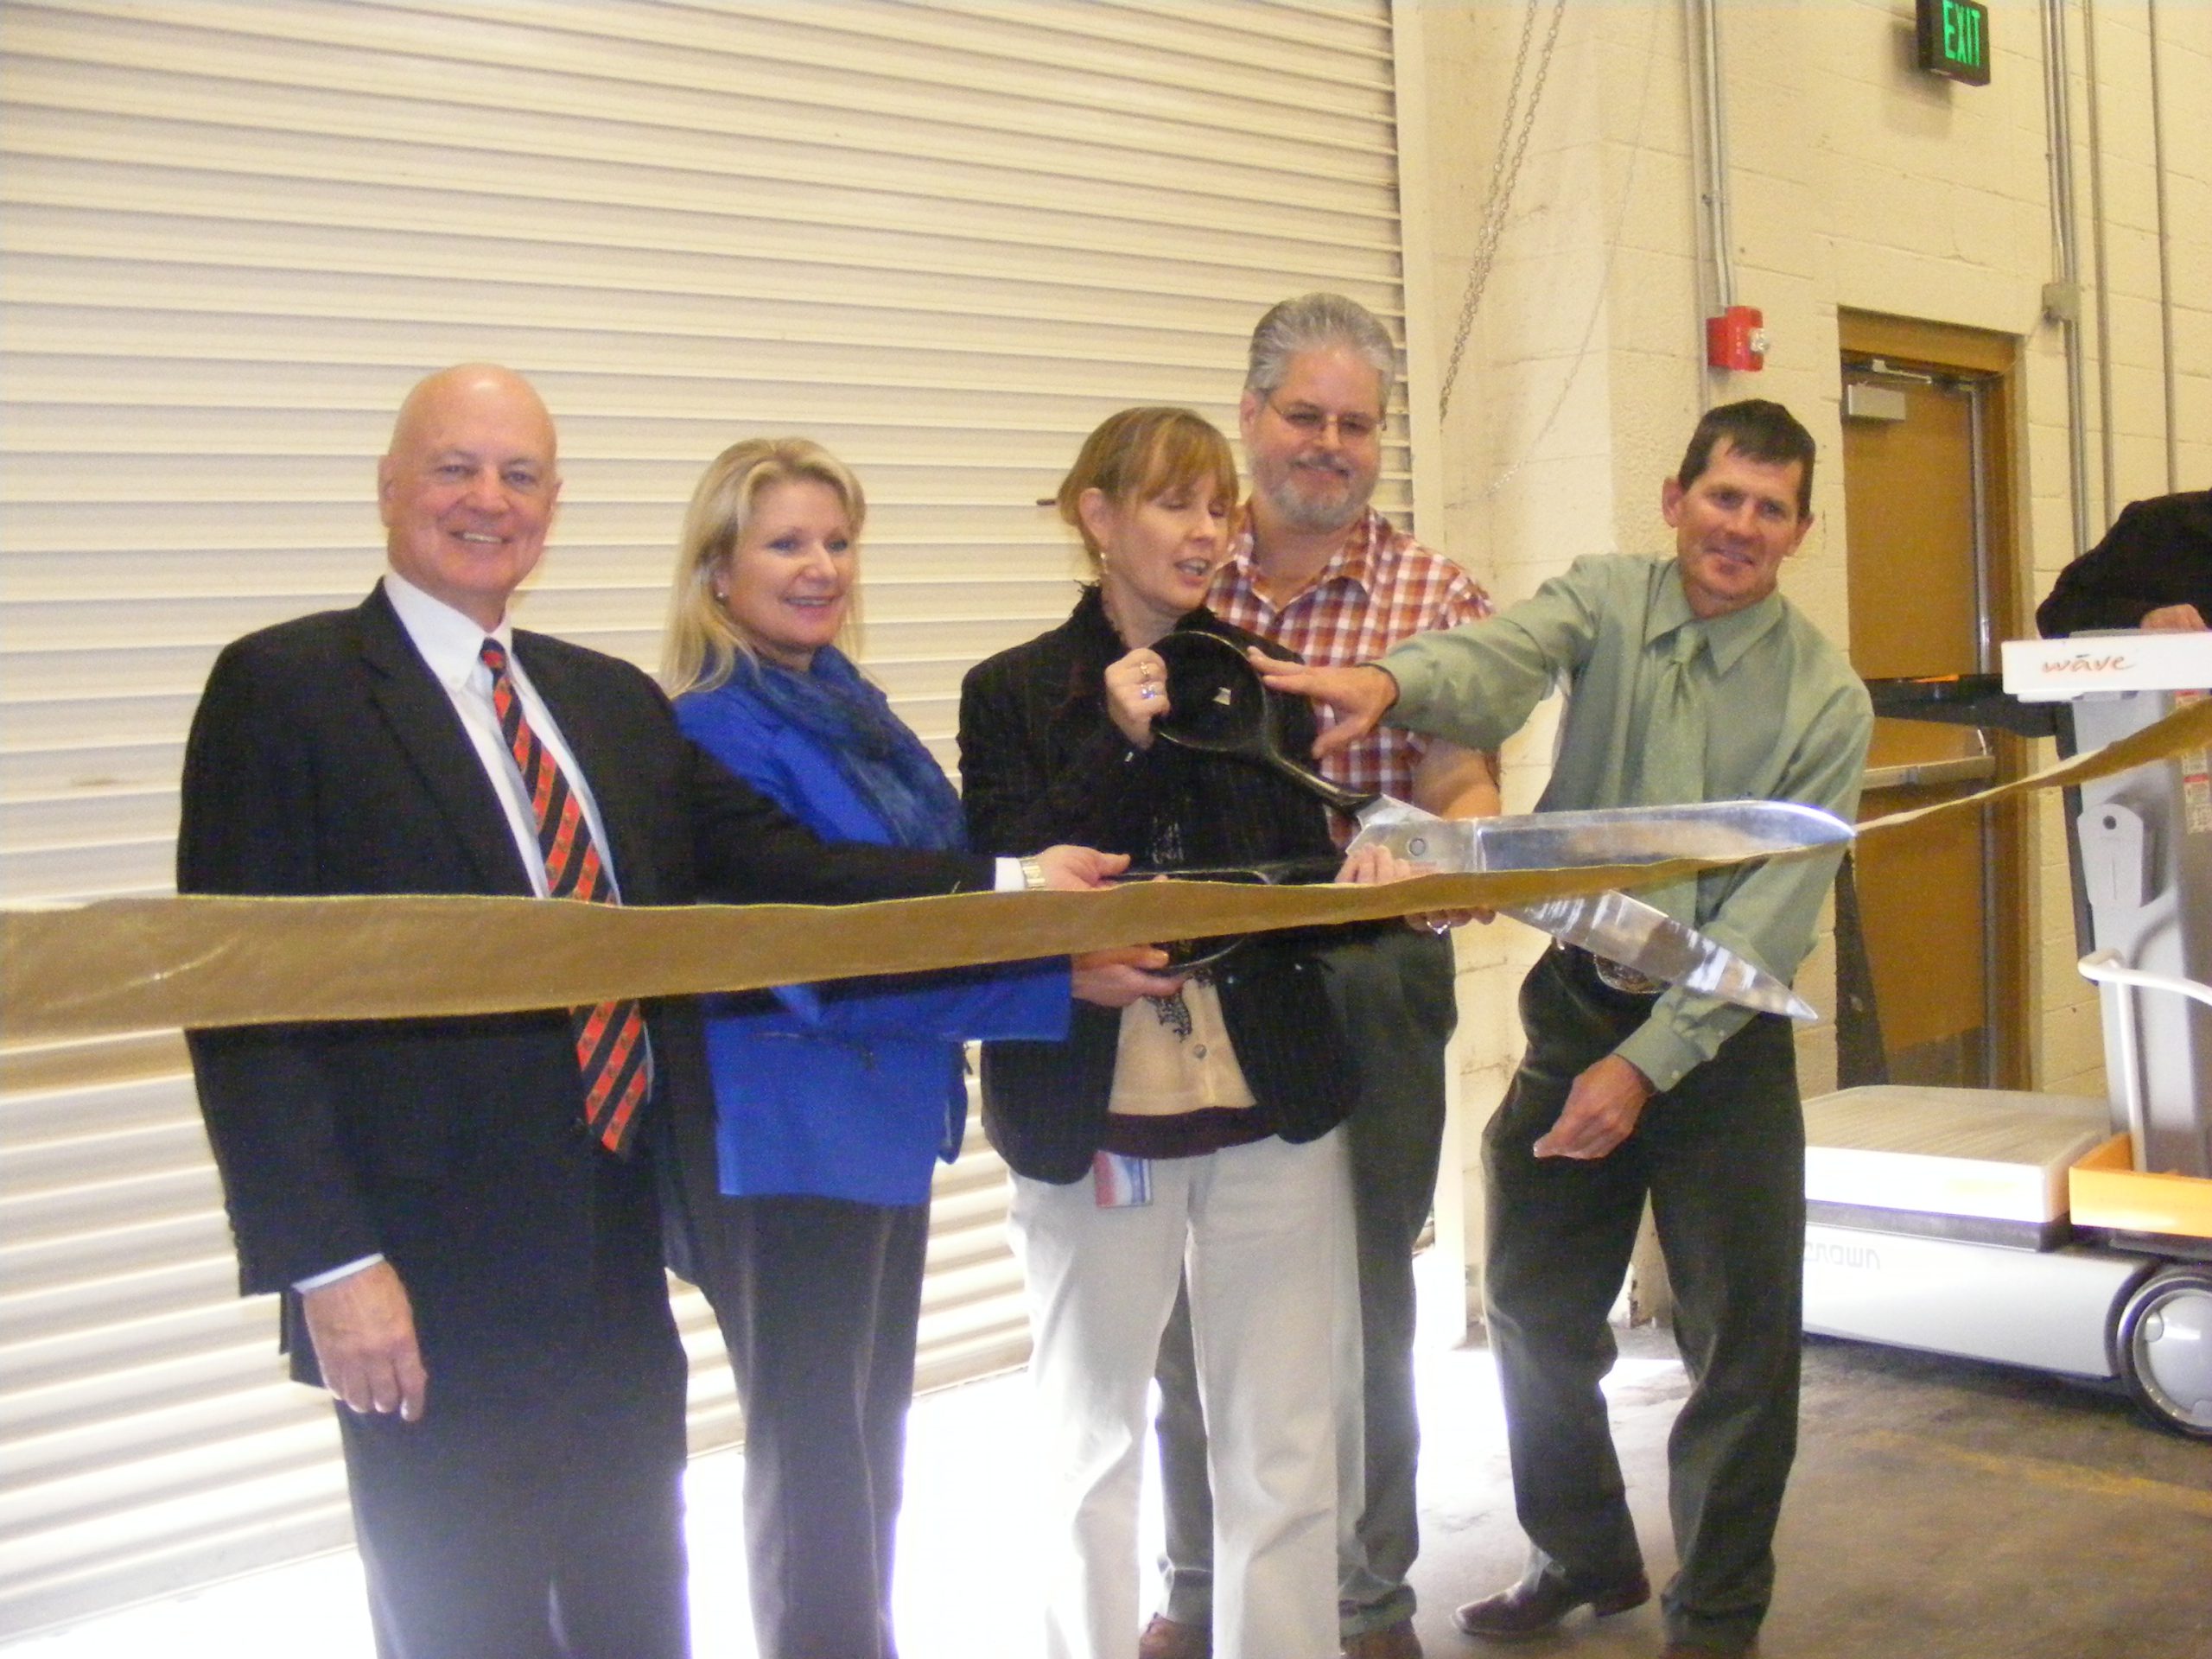 Photograph of 5 individuals cutting the ribbon at the Utah State Records Center Ribbon Cutting, 2012. 